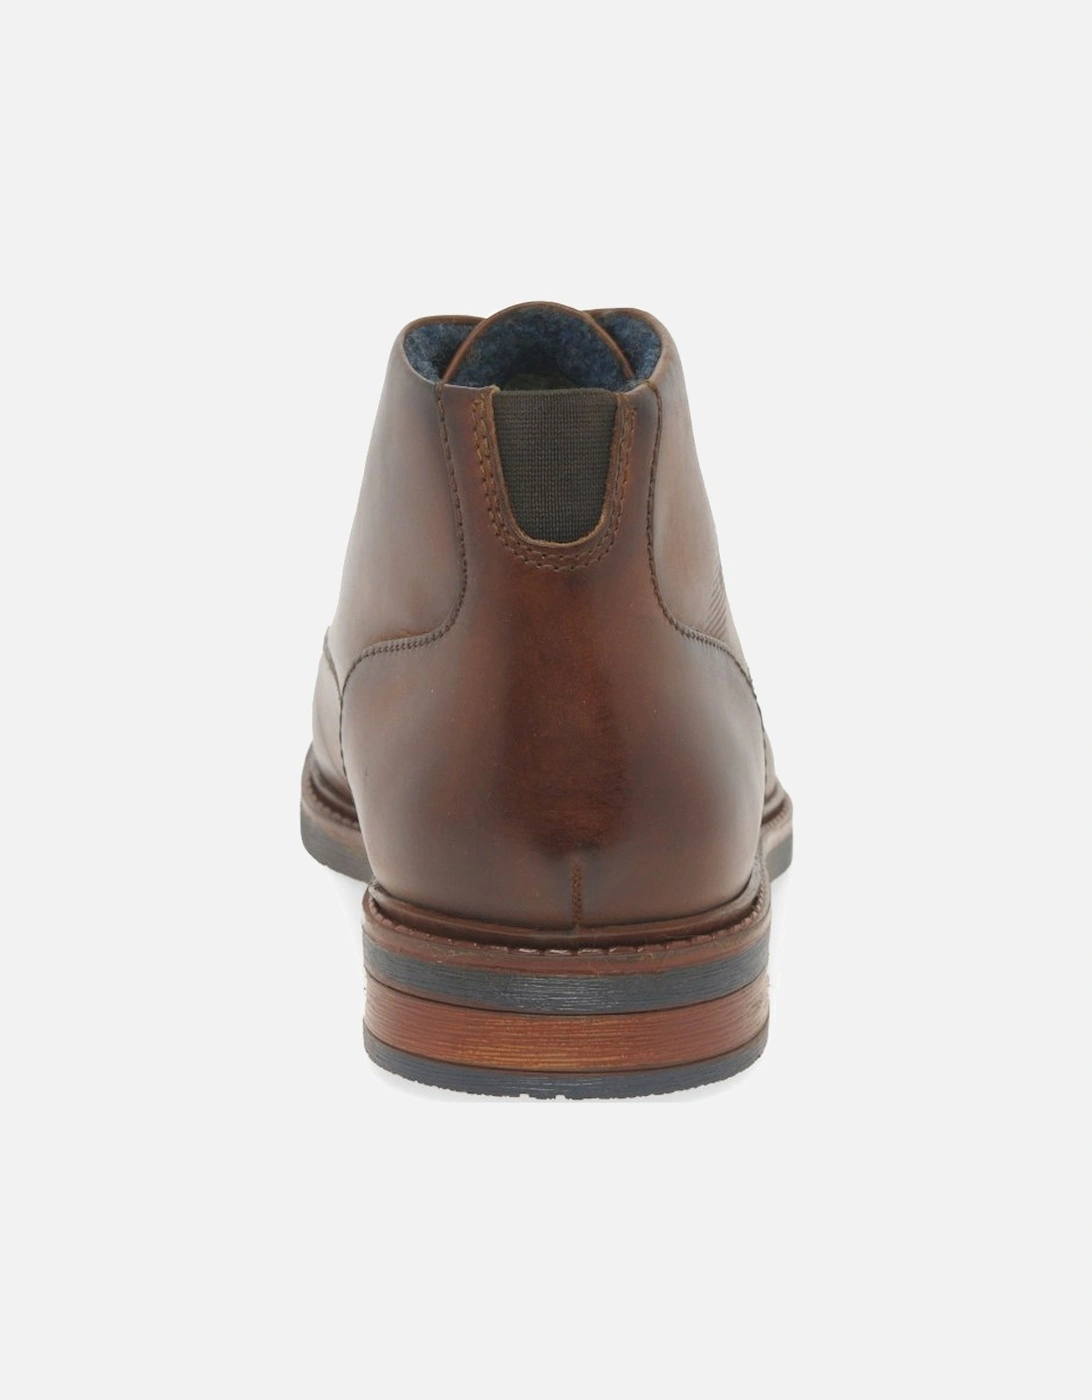 Maiko Mens Boots